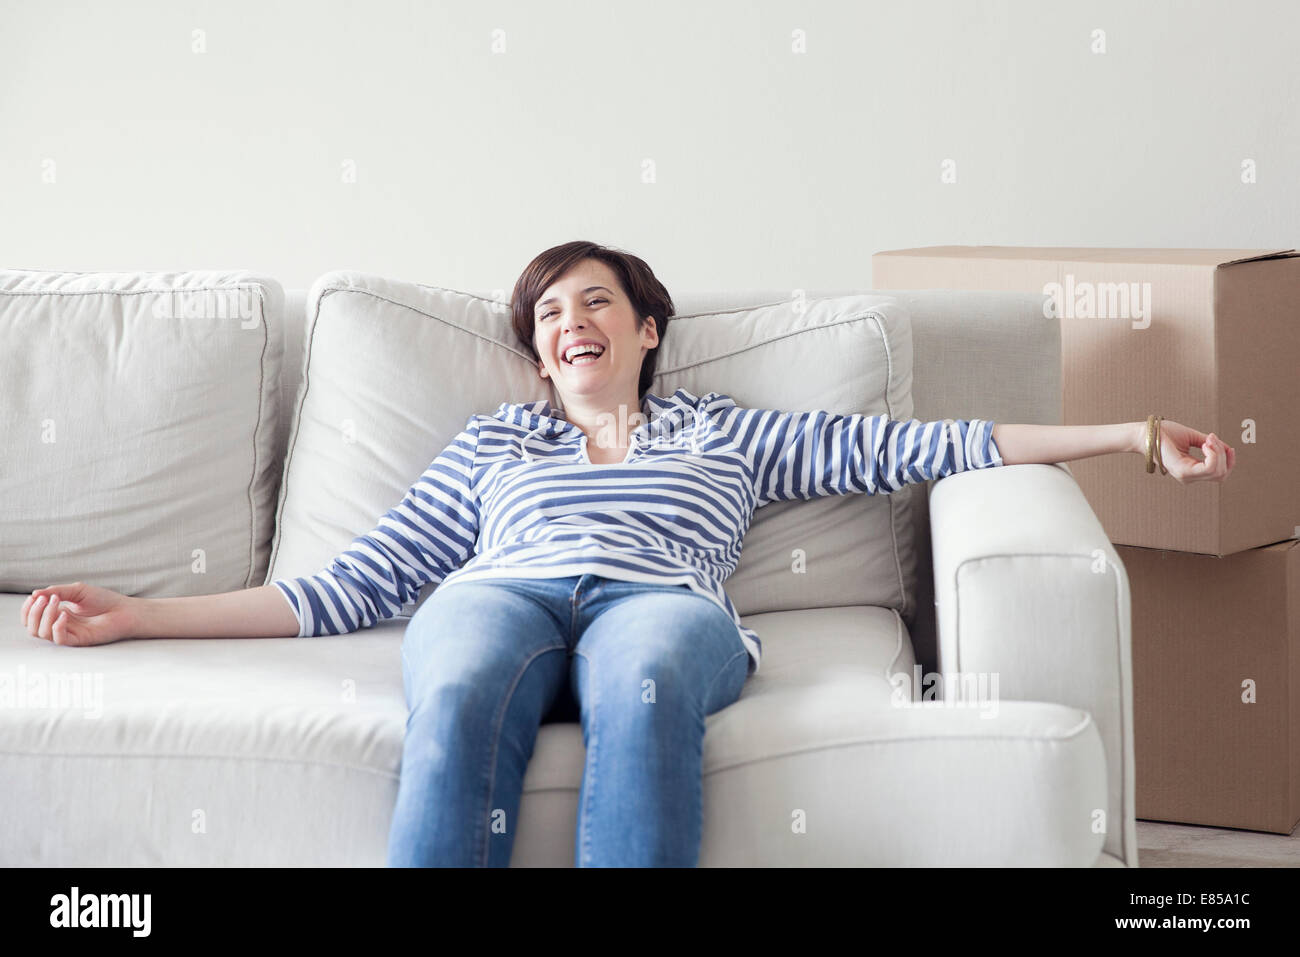 Woman resting on sofa while moving house Stock Photo